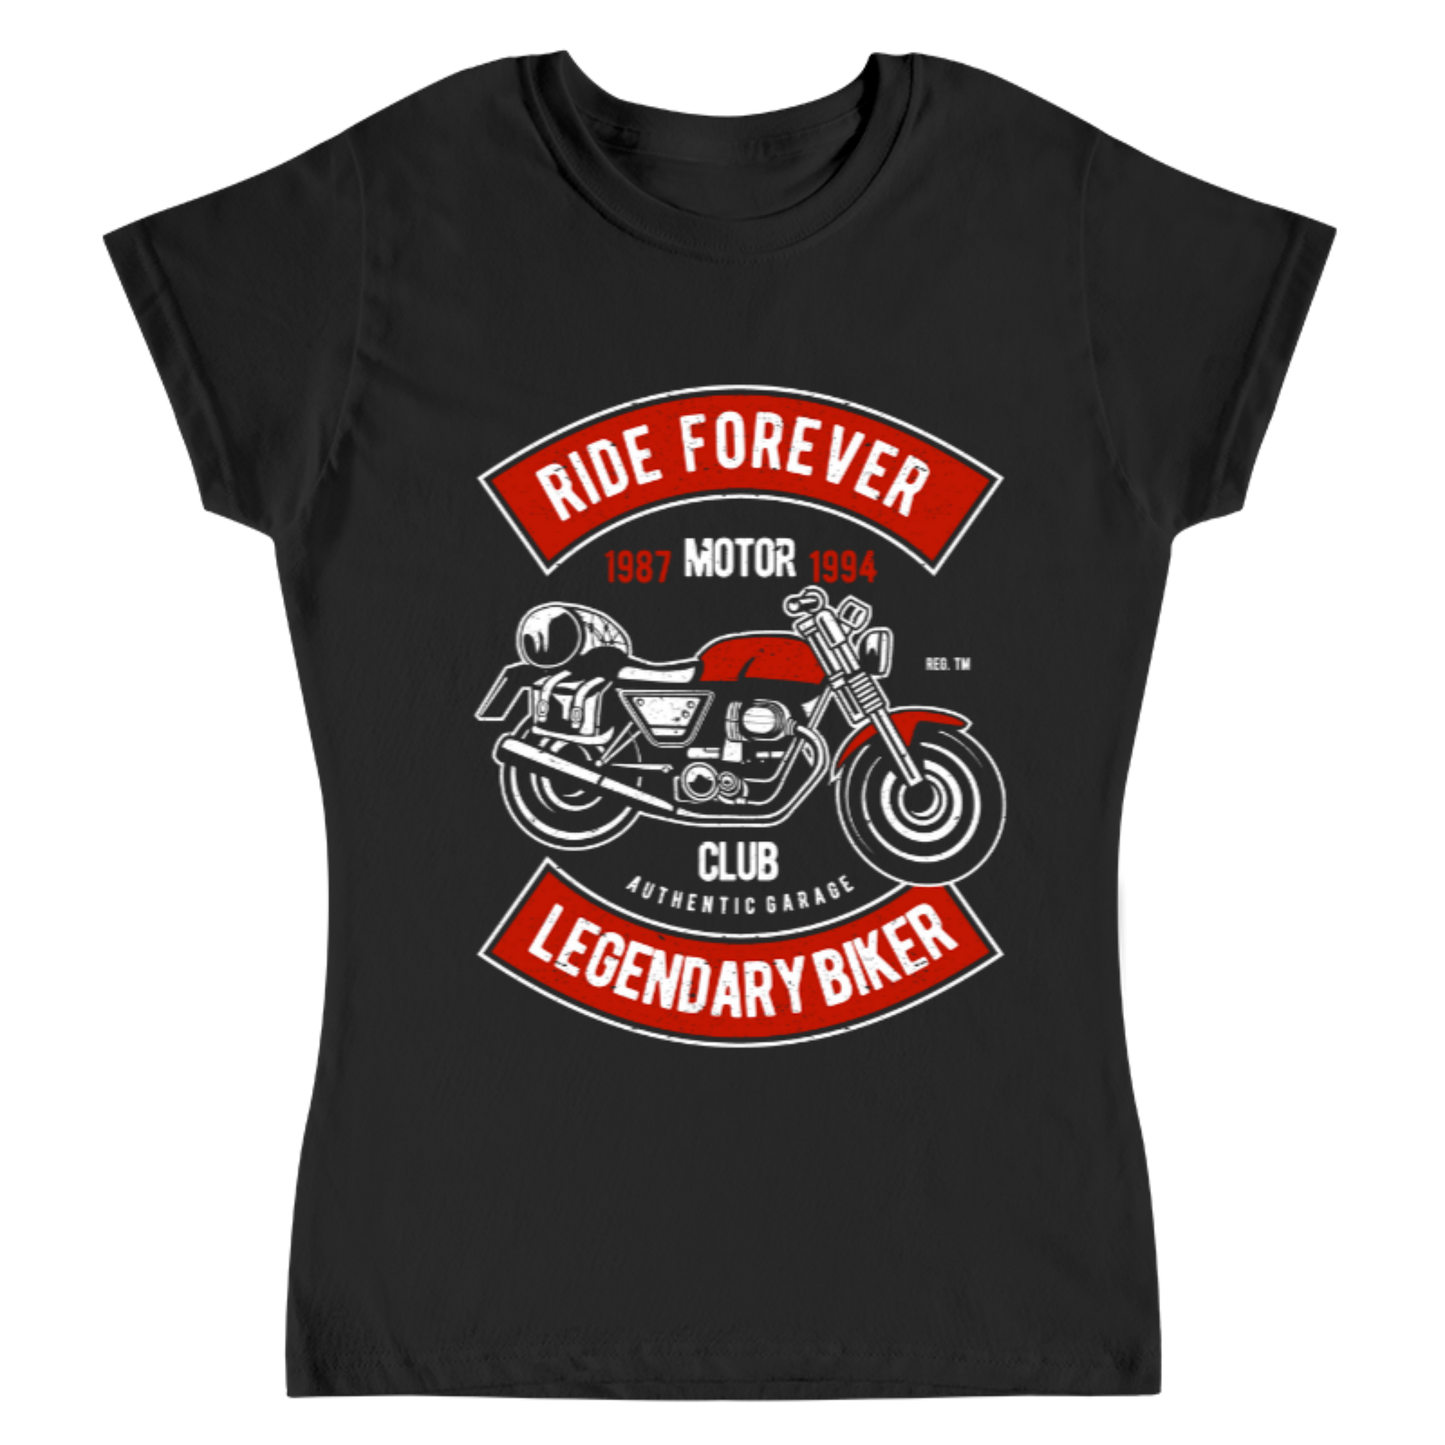 Playera Vintage Ride Forever - Mujer